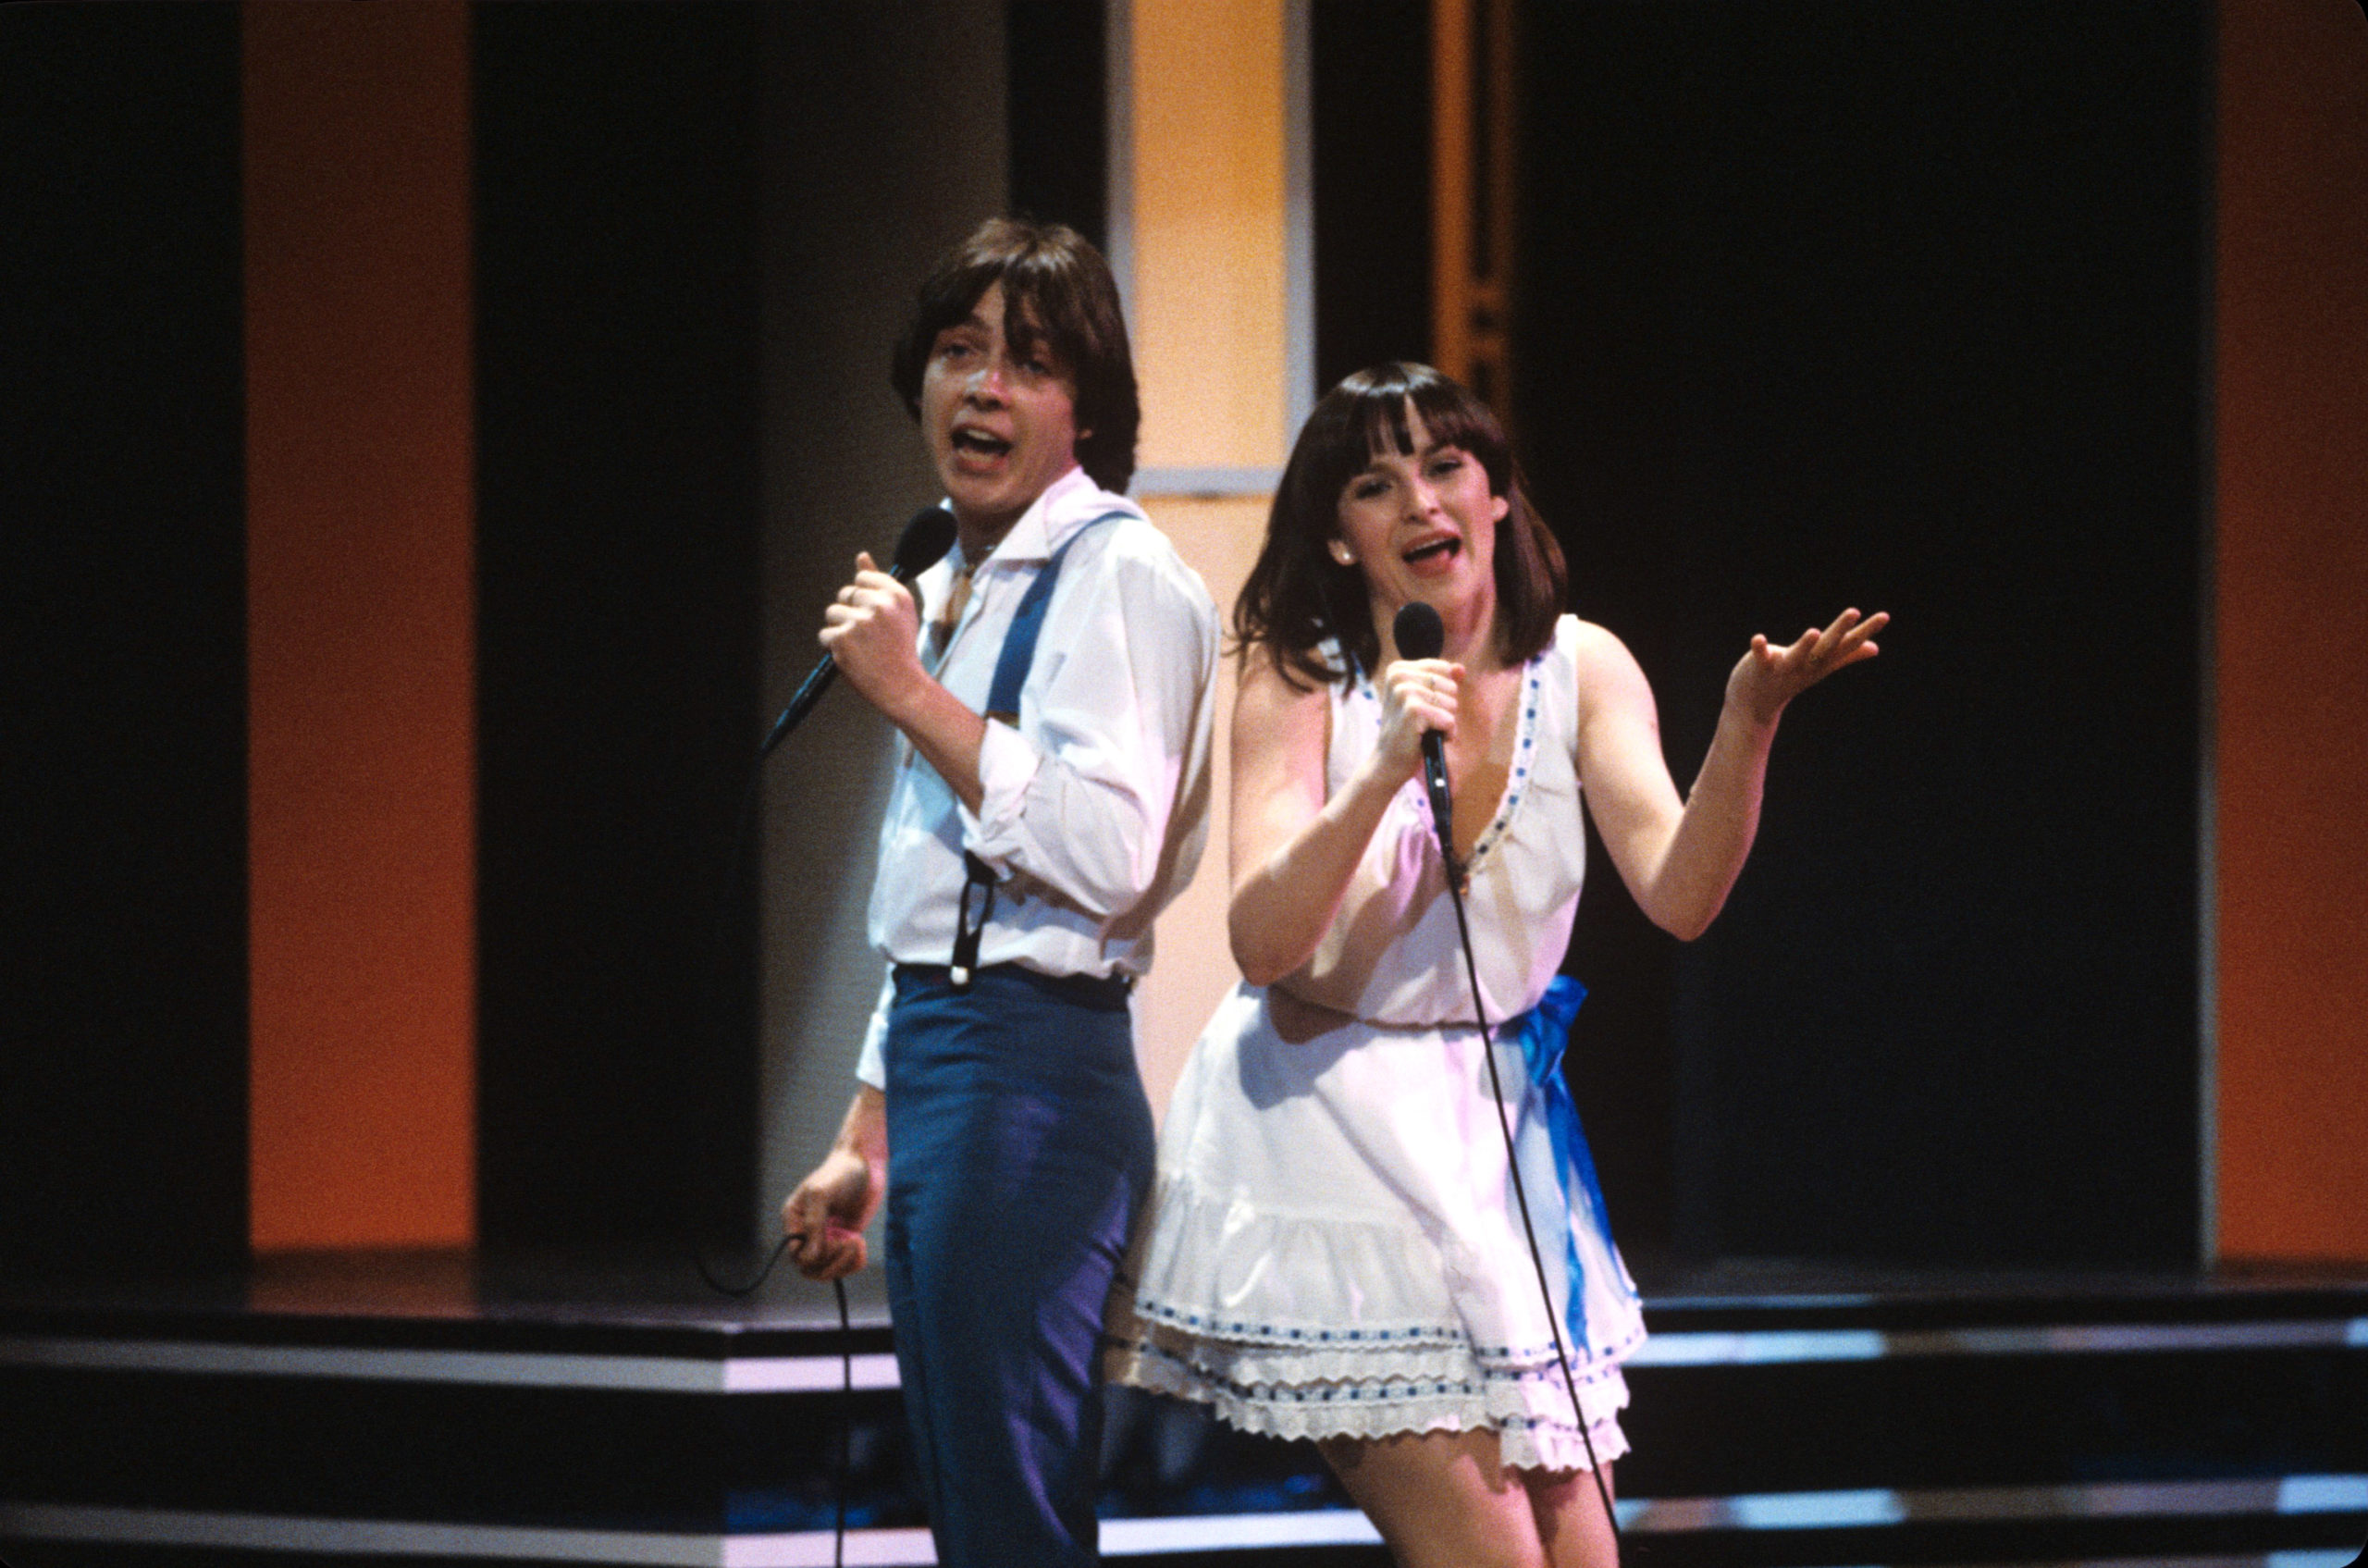 Sally Ann with Stephen Fischer as Bardo in the Eurovision Song Contest in 1982